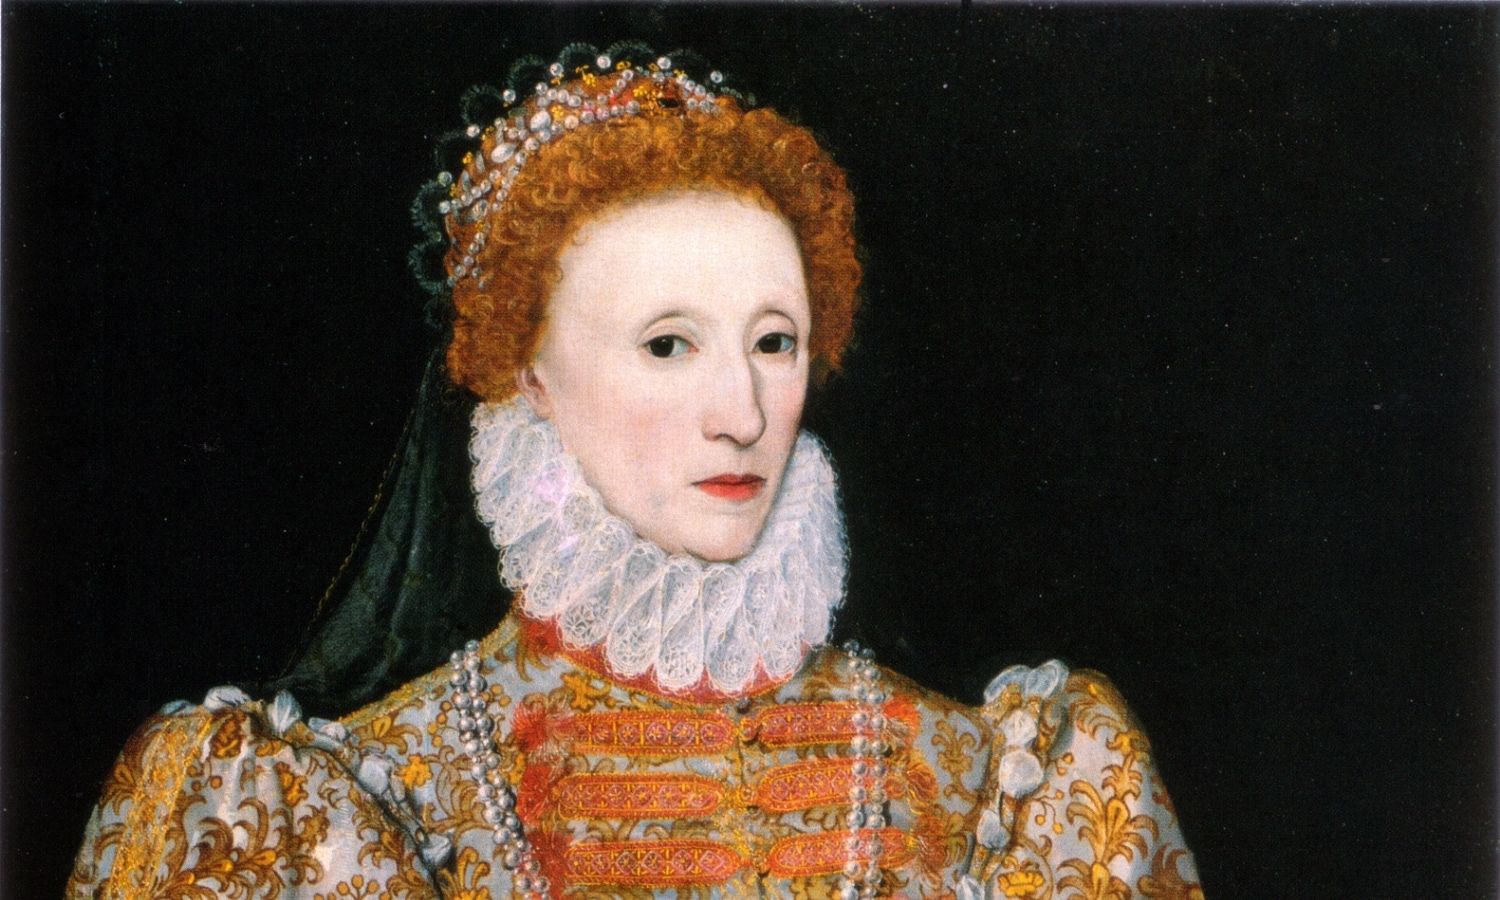 OTD in 1558: Queen Elizabeth I was coronated and re-established the protestant Church of England.